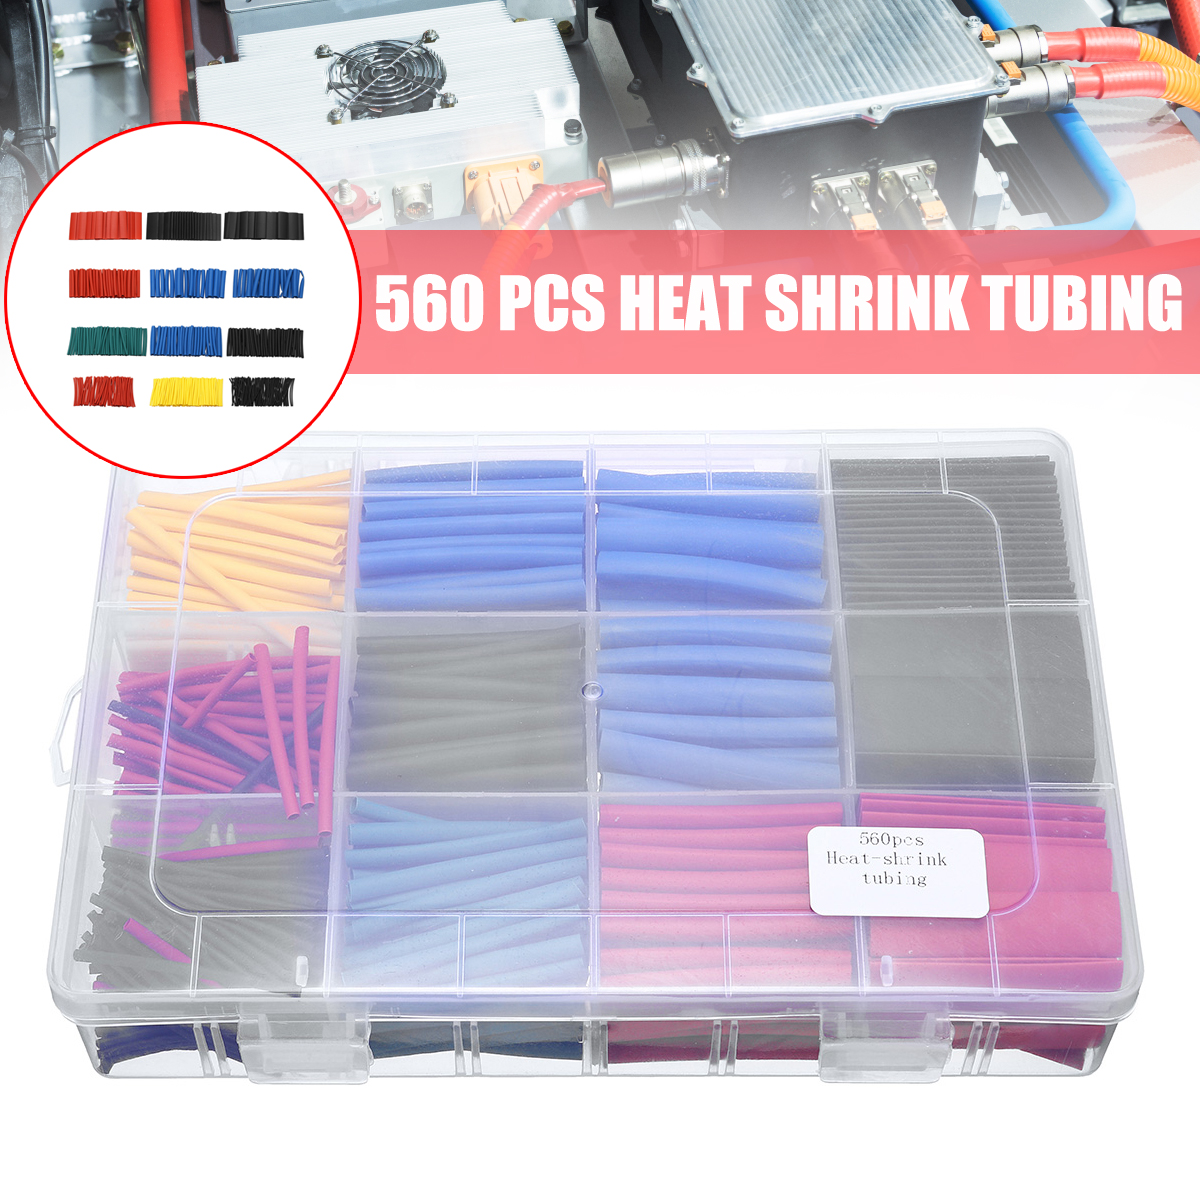 560Pcs-11-Sizes-Heat-Shrink-Tubing-Tube-Wire-Cable-Insulation-Sleeving-Kit-1365687-2